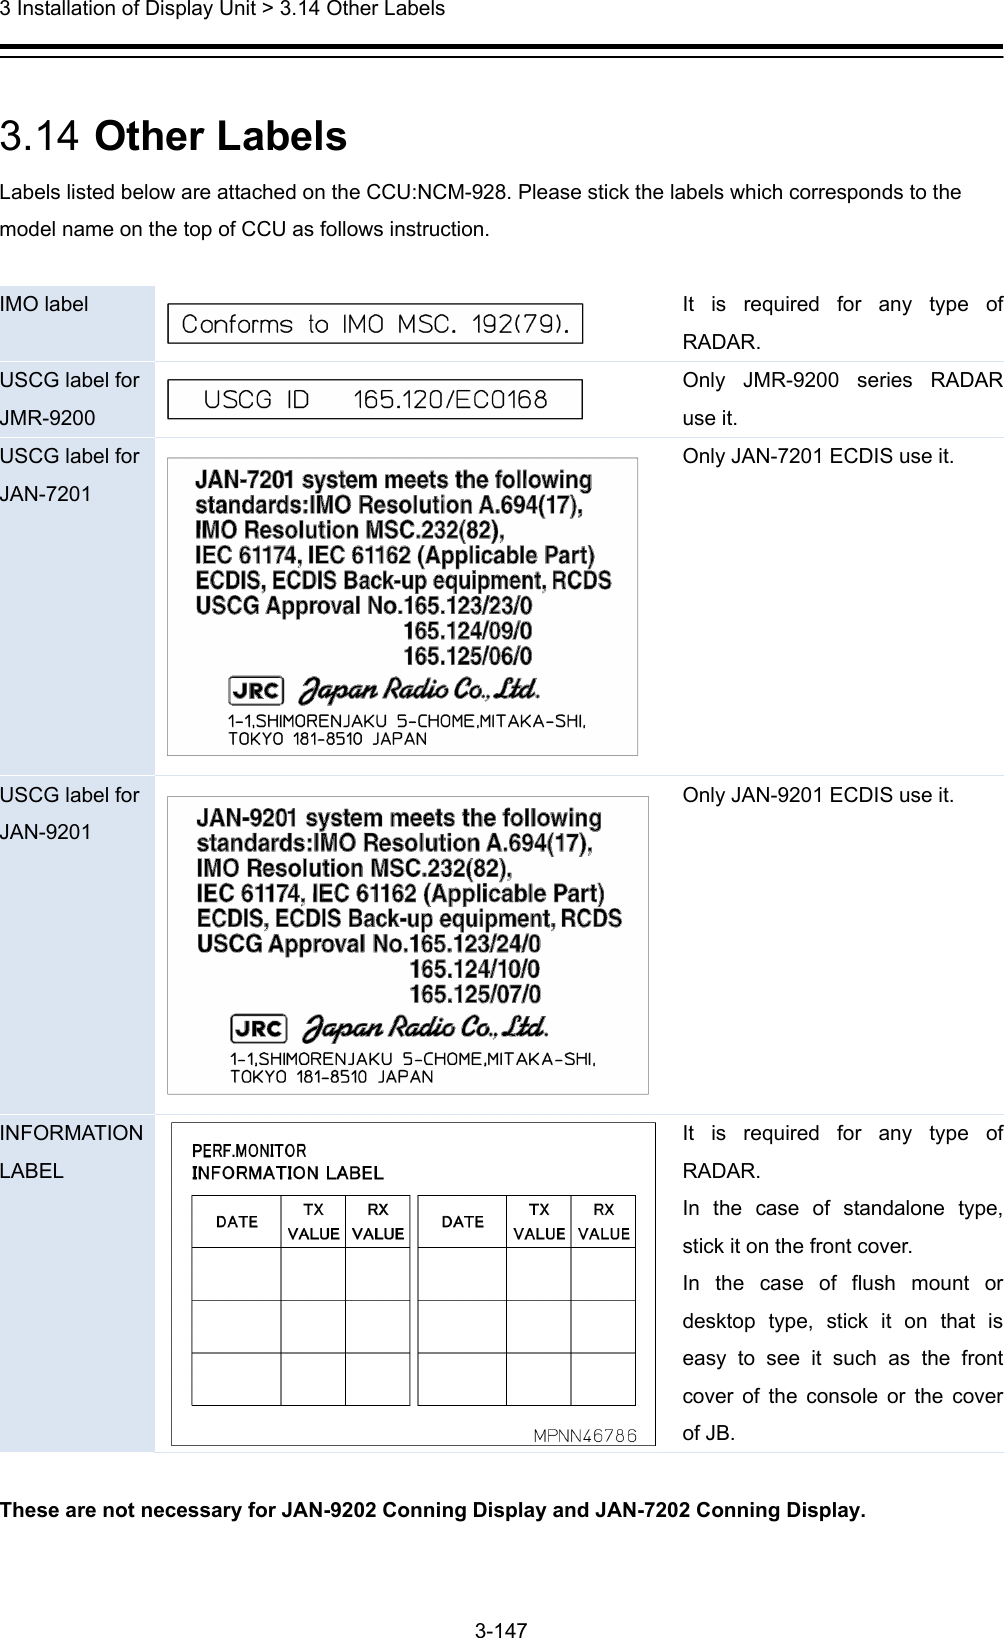  3 Installation of Display Unit &gt; 3.14 Other Labels 3-147   3.14  Other Labels Labels listed below are attached on the CCU:NCM-928. Please stick the labels which corresponds to the model name on the top of CCU as follows instruction.  IMO label   It is required for any type of RADAR. USCG label for JMR-9200   Only JMR-9200 series RADAR use it. USCG label for JAN-7201  Only JAN-7201 ECDIS use it. USCG label for JAN-9201  Only JAN-9201 ECDIS use it. INFORMATION LABEL It is required for any type of RADAR. In the case of standalone type, stick it on the front cover. In the case of flush mount or desktop type, stick it on that is easy to see it such as the front cover of the console or the cover of JB.  These are not necessary for JAN-9202 Conning Display and JAN-7202 Conning Display. 